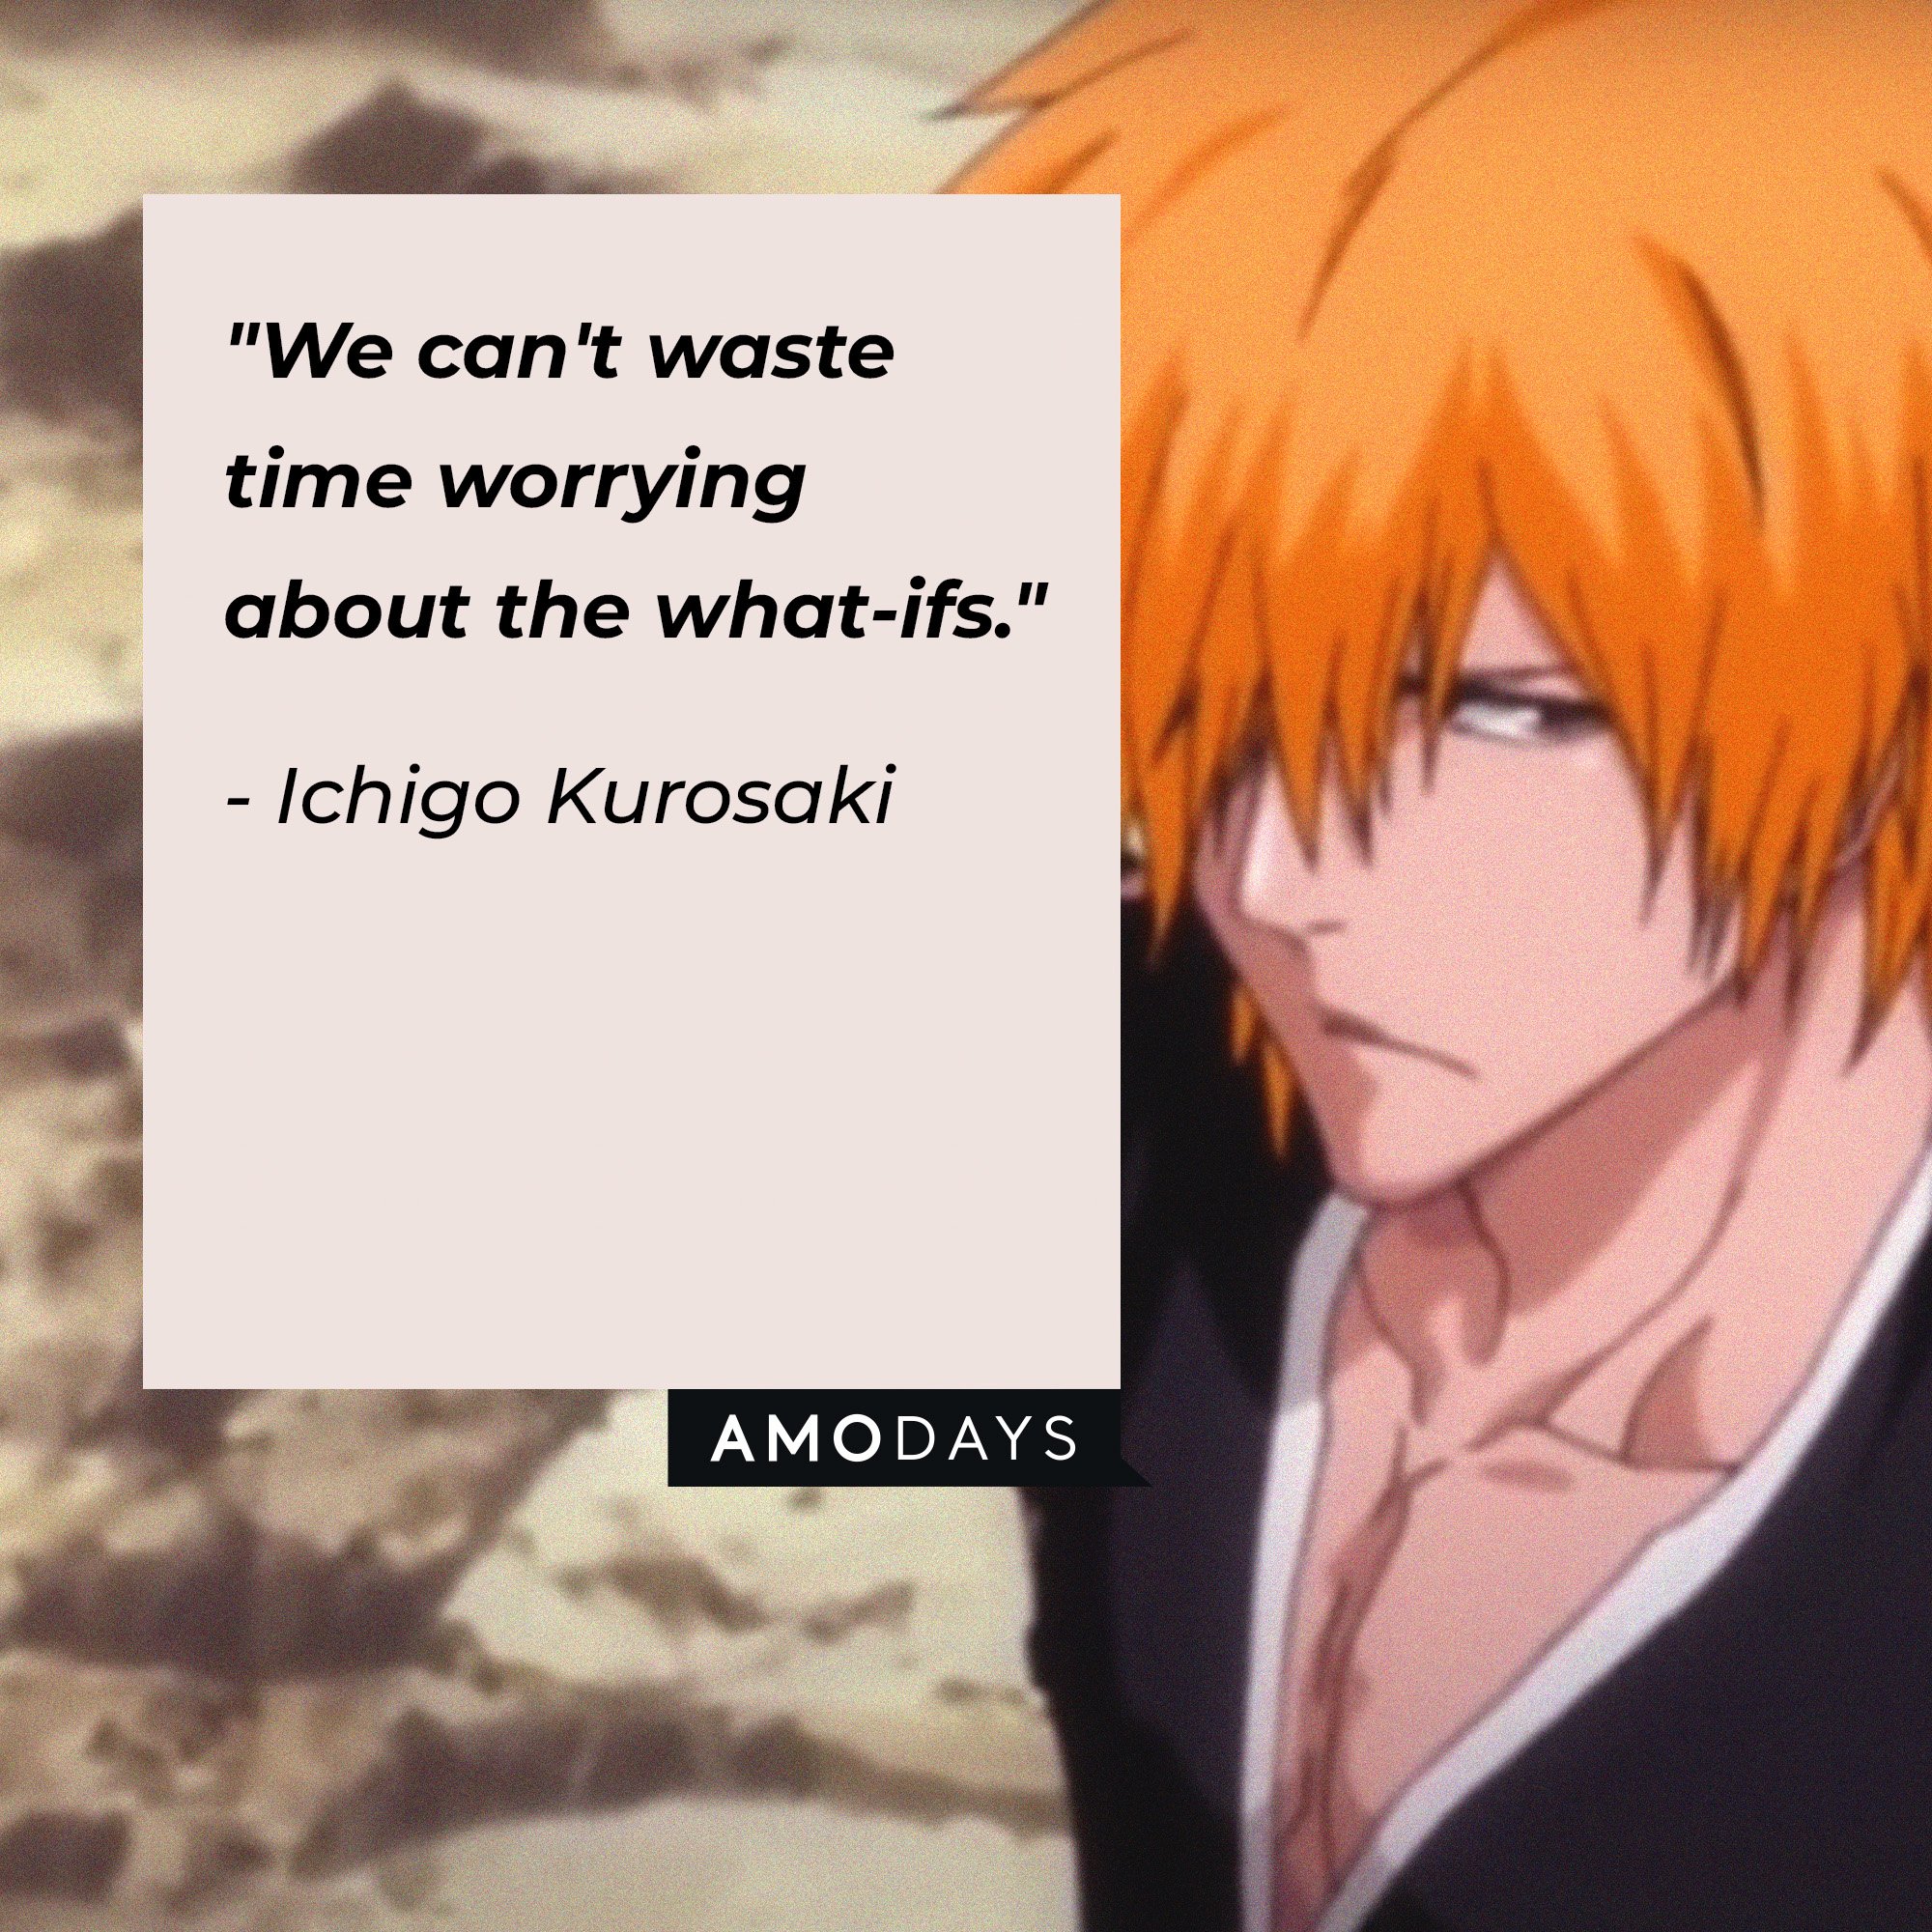 Ichigo Kurosaki’s quote: "We can't waste time worrying about the what-ifs." | Image: AmoDays